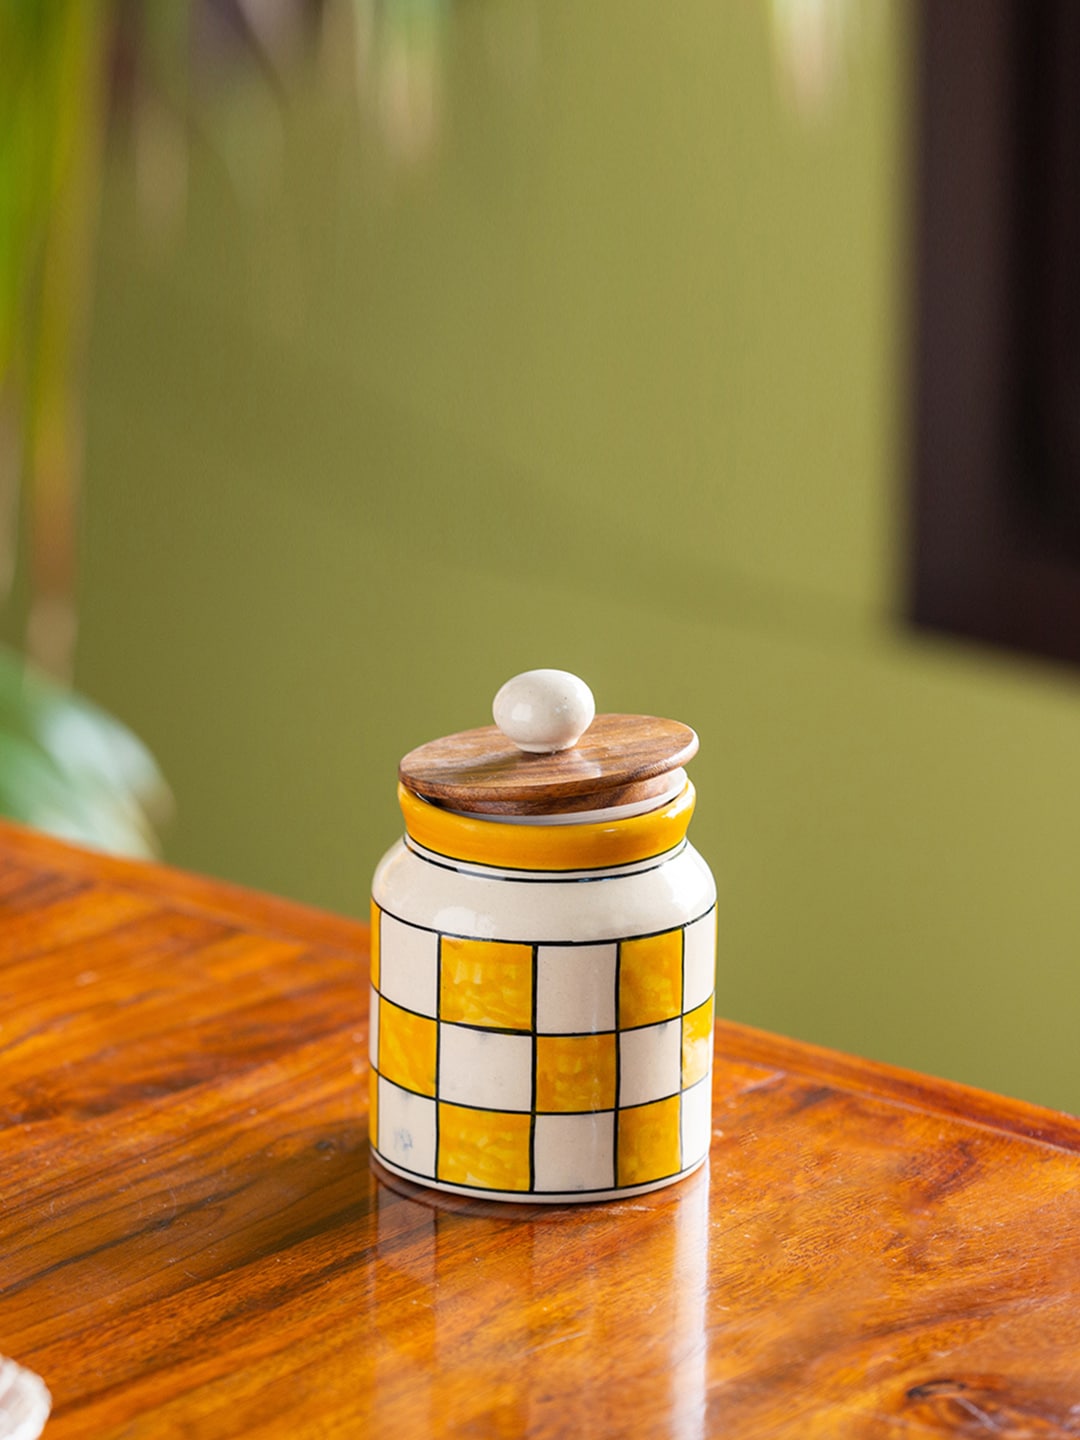 ExclusiveLane Yellow & White Hand-Painted Ceramic Canister Price in India